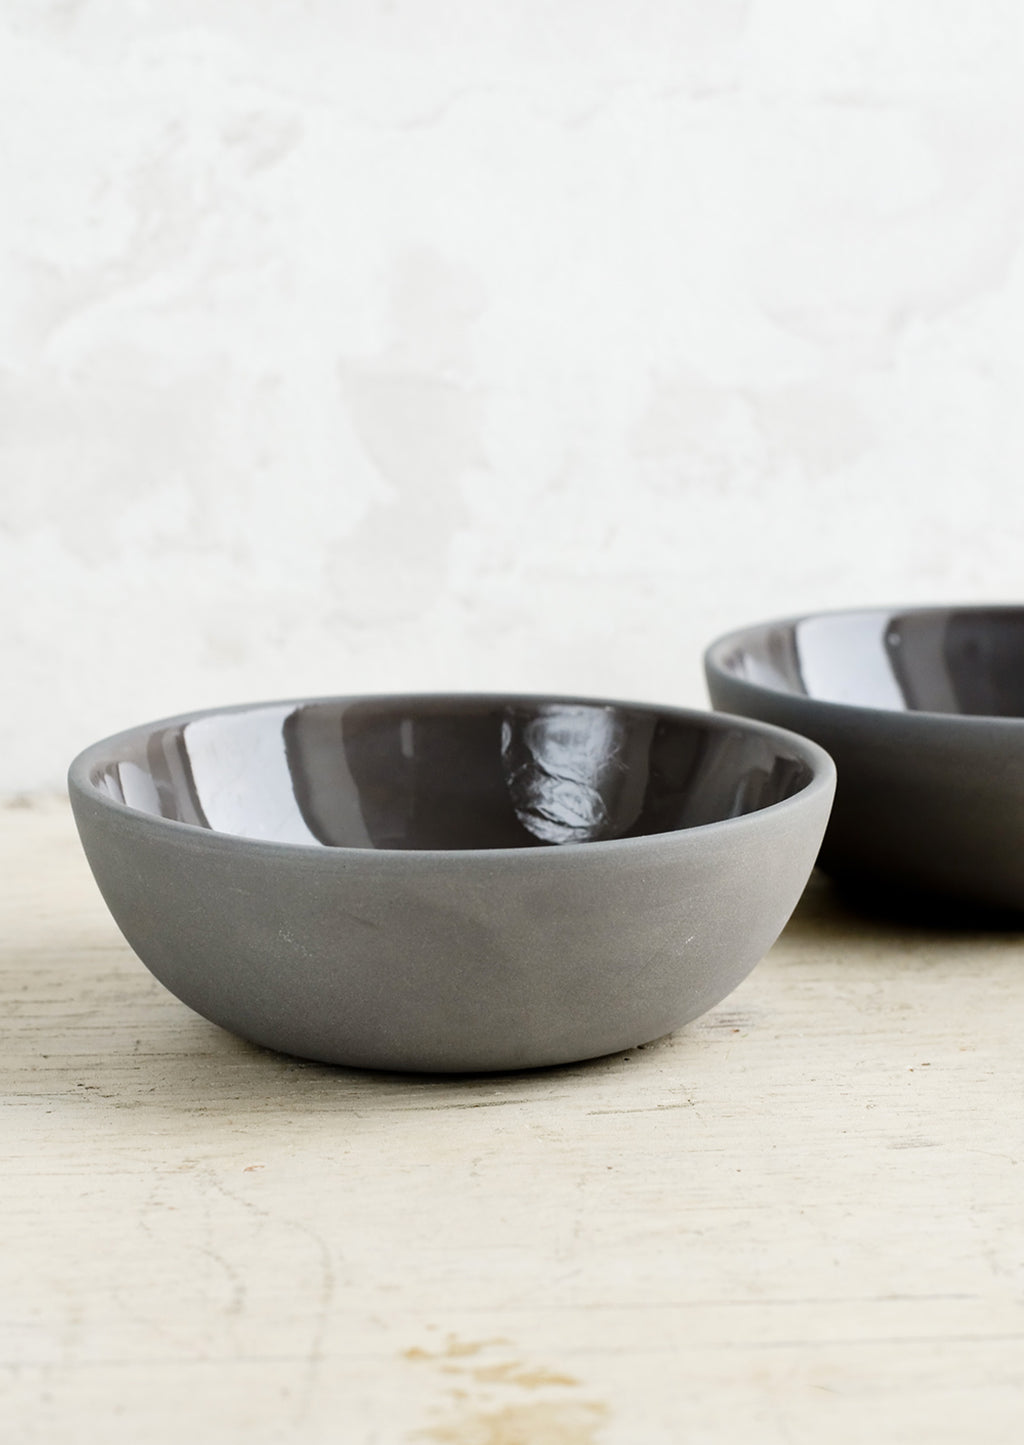 Charcoal: Matte porcelain bowls in charcoal hue with glossy interior.